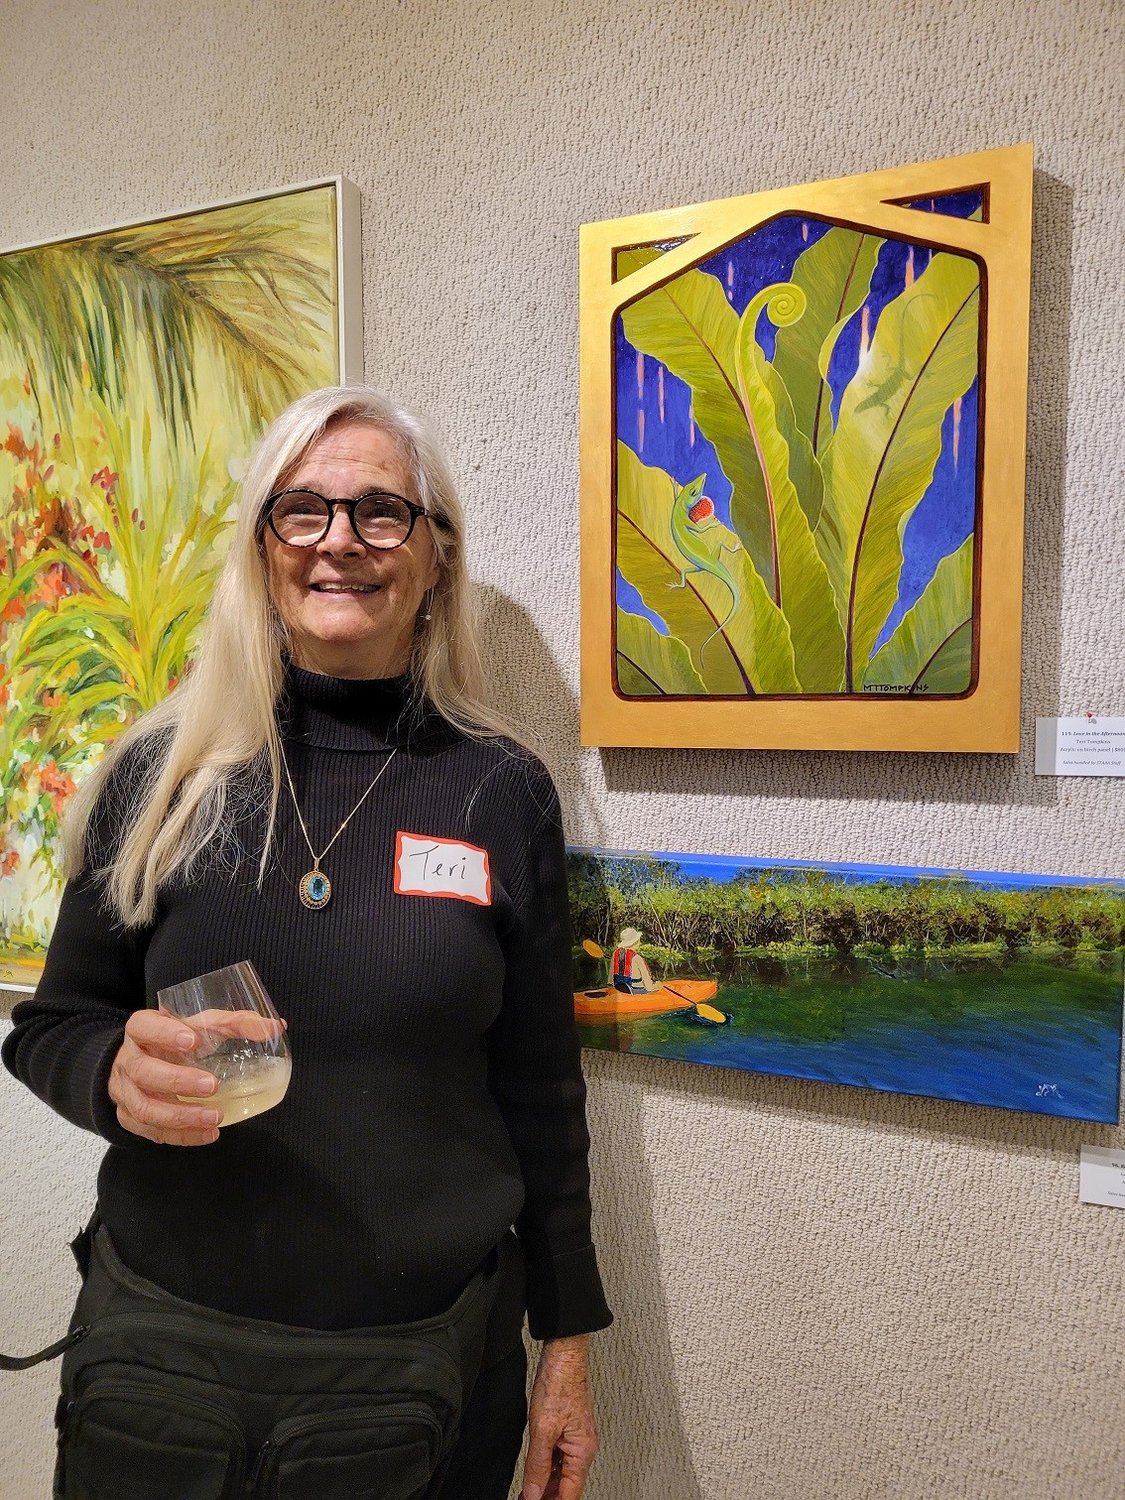 Teri Tompkins, an artist at St. Augustine Art Association, attends a recent event in front of her artwork, “Love in the Afternoon,” acrylic on birch panel.